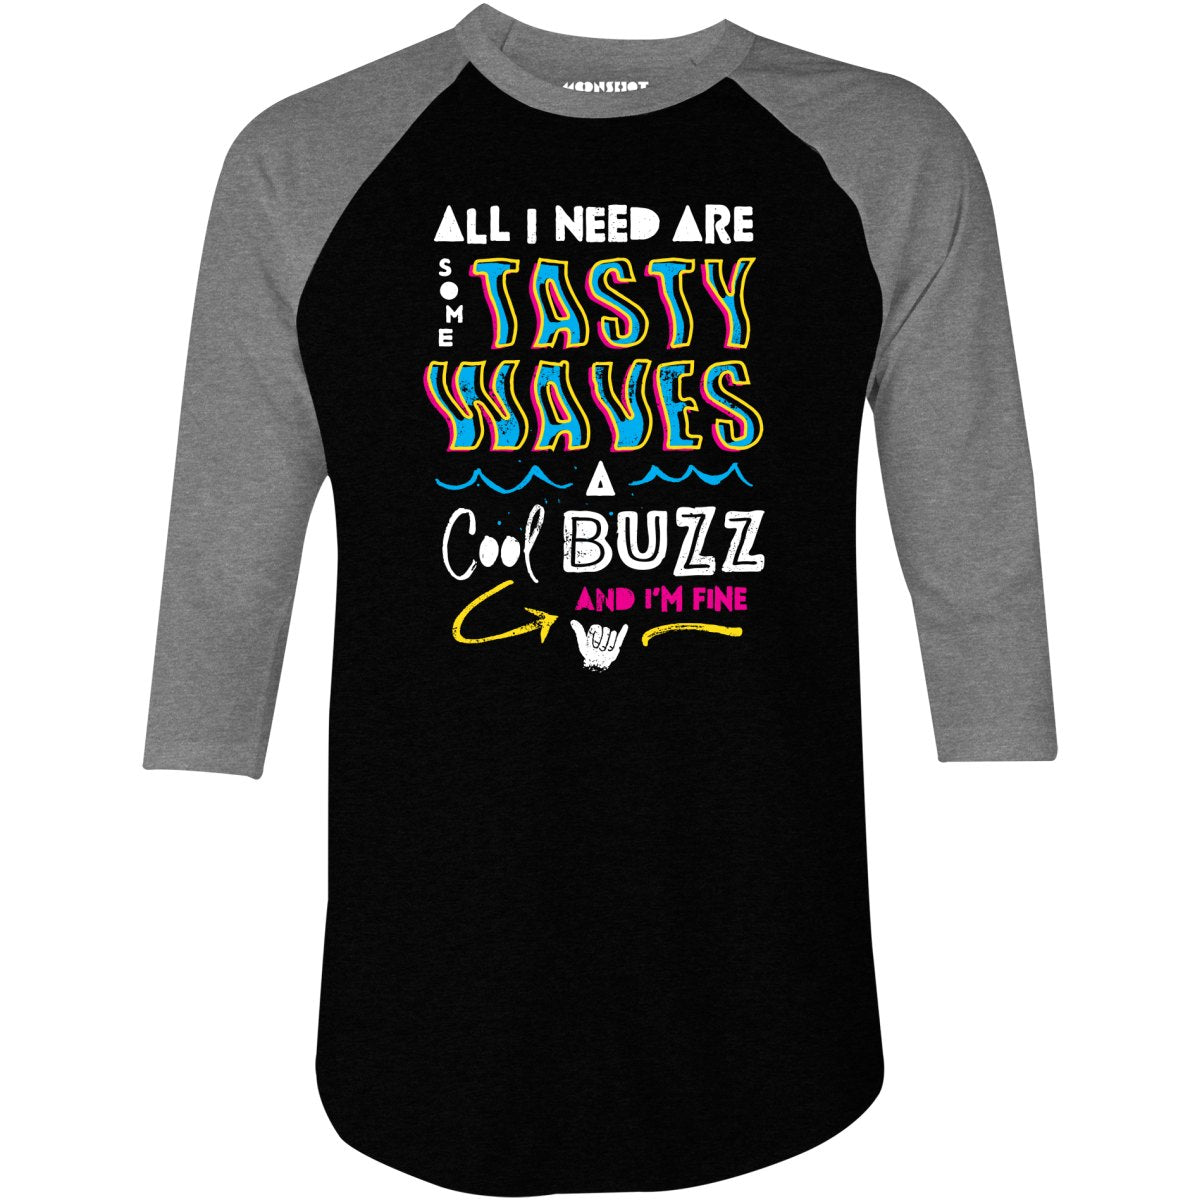 All I Need Are Some Tasty Waves a Cool Buzz and I'm Fine - 3/4 Sleeve Raglan T-Shirt